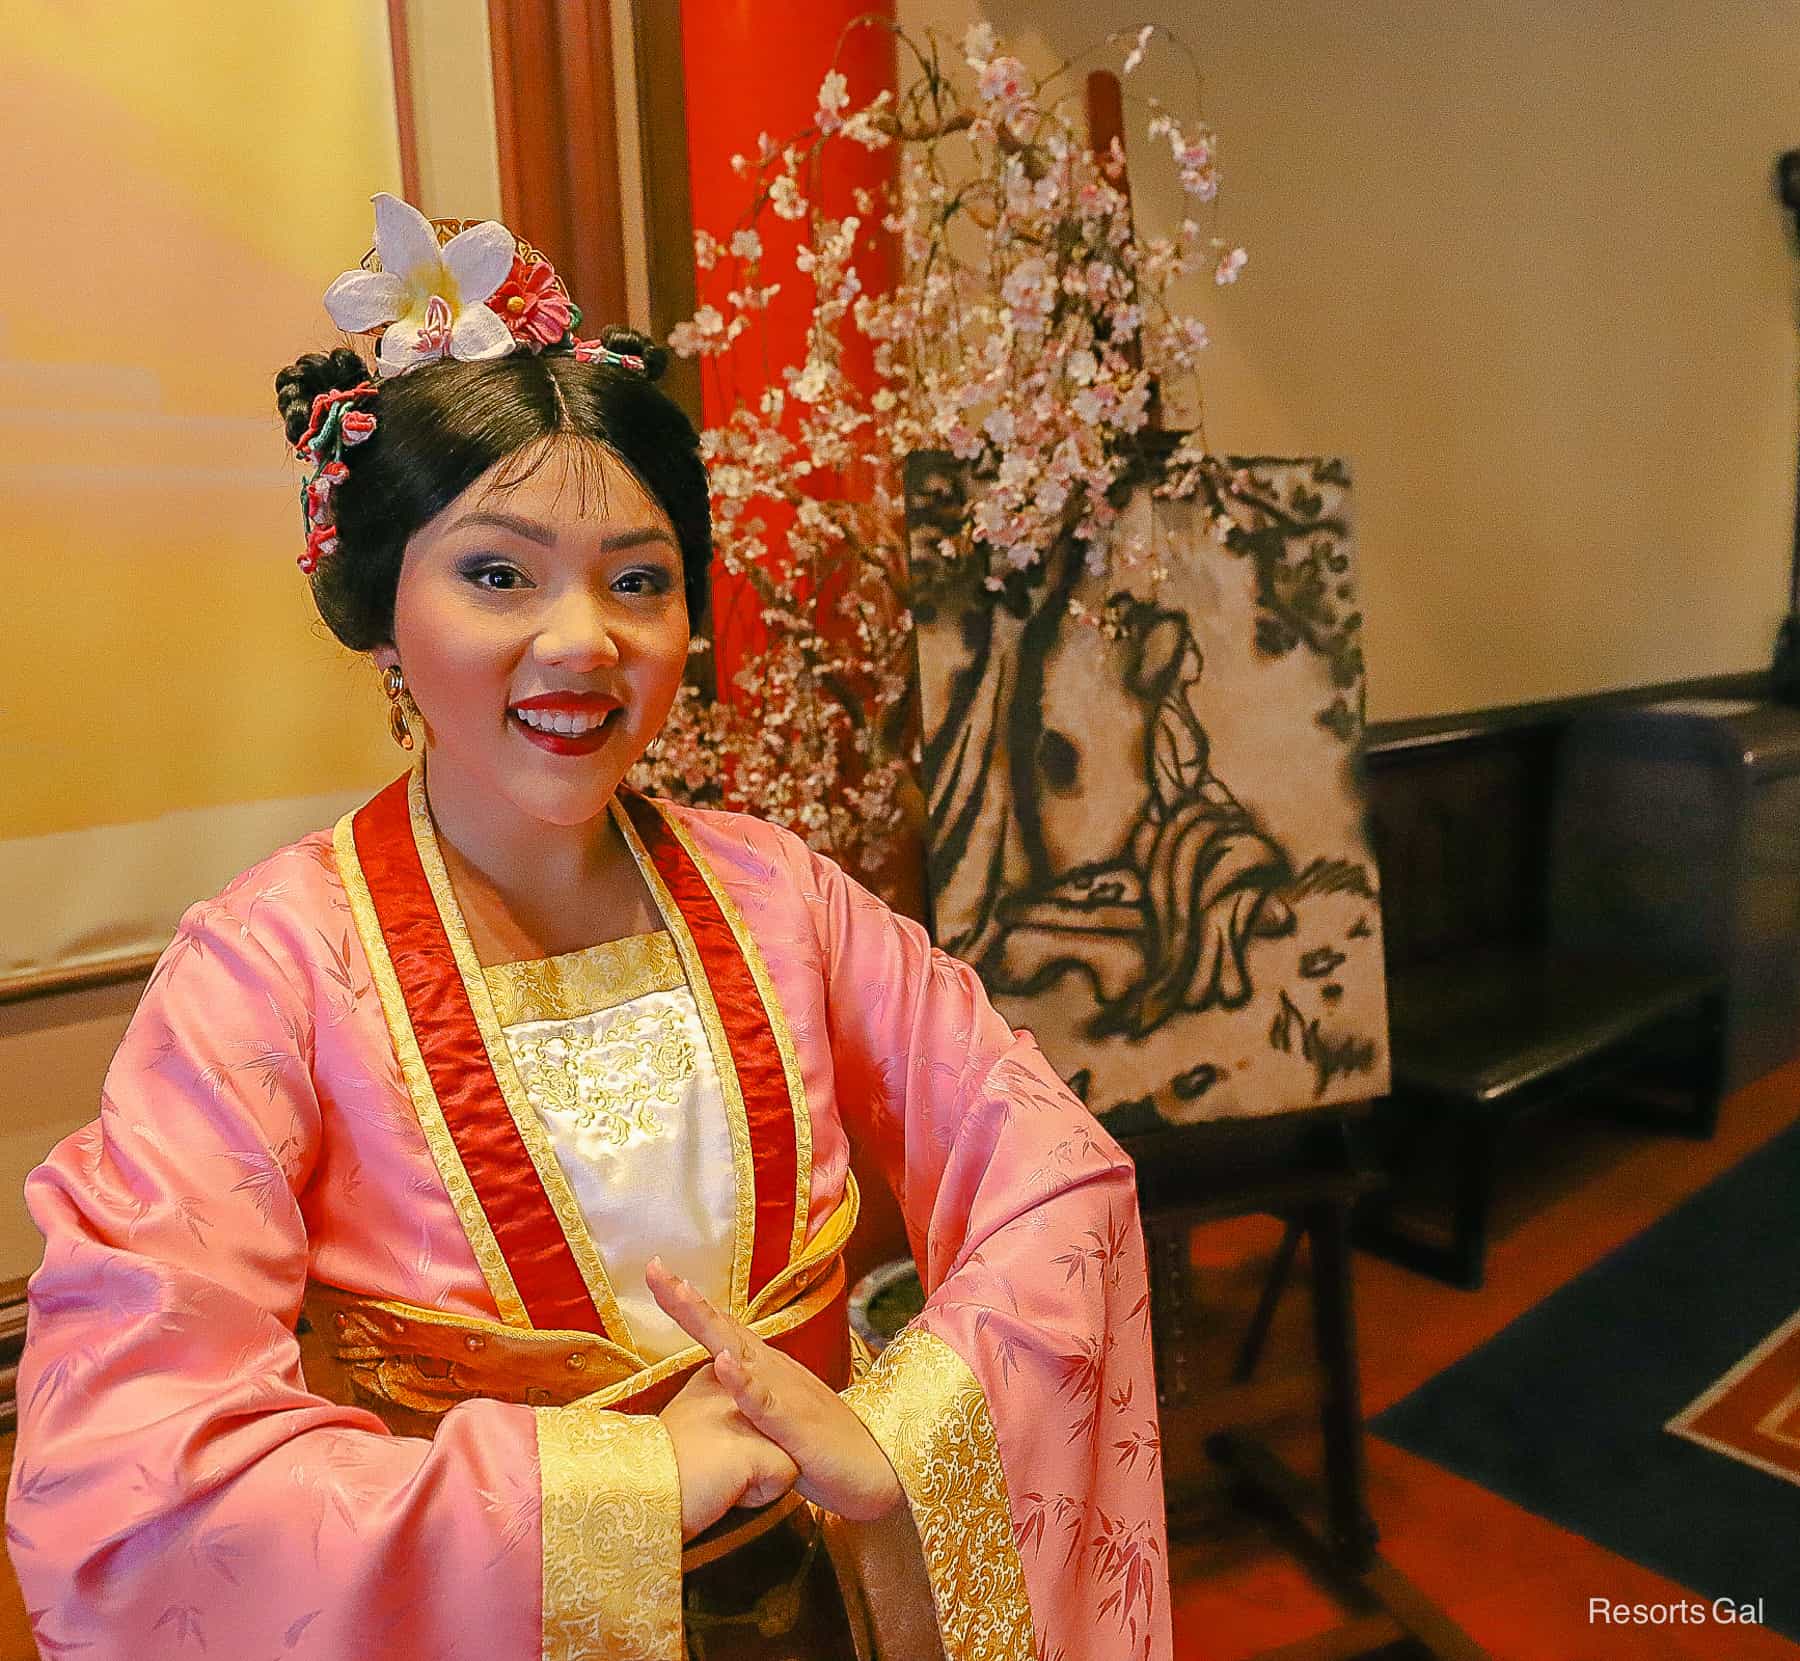 Mulan poses with her formal dress in pink with red and gold trim. 